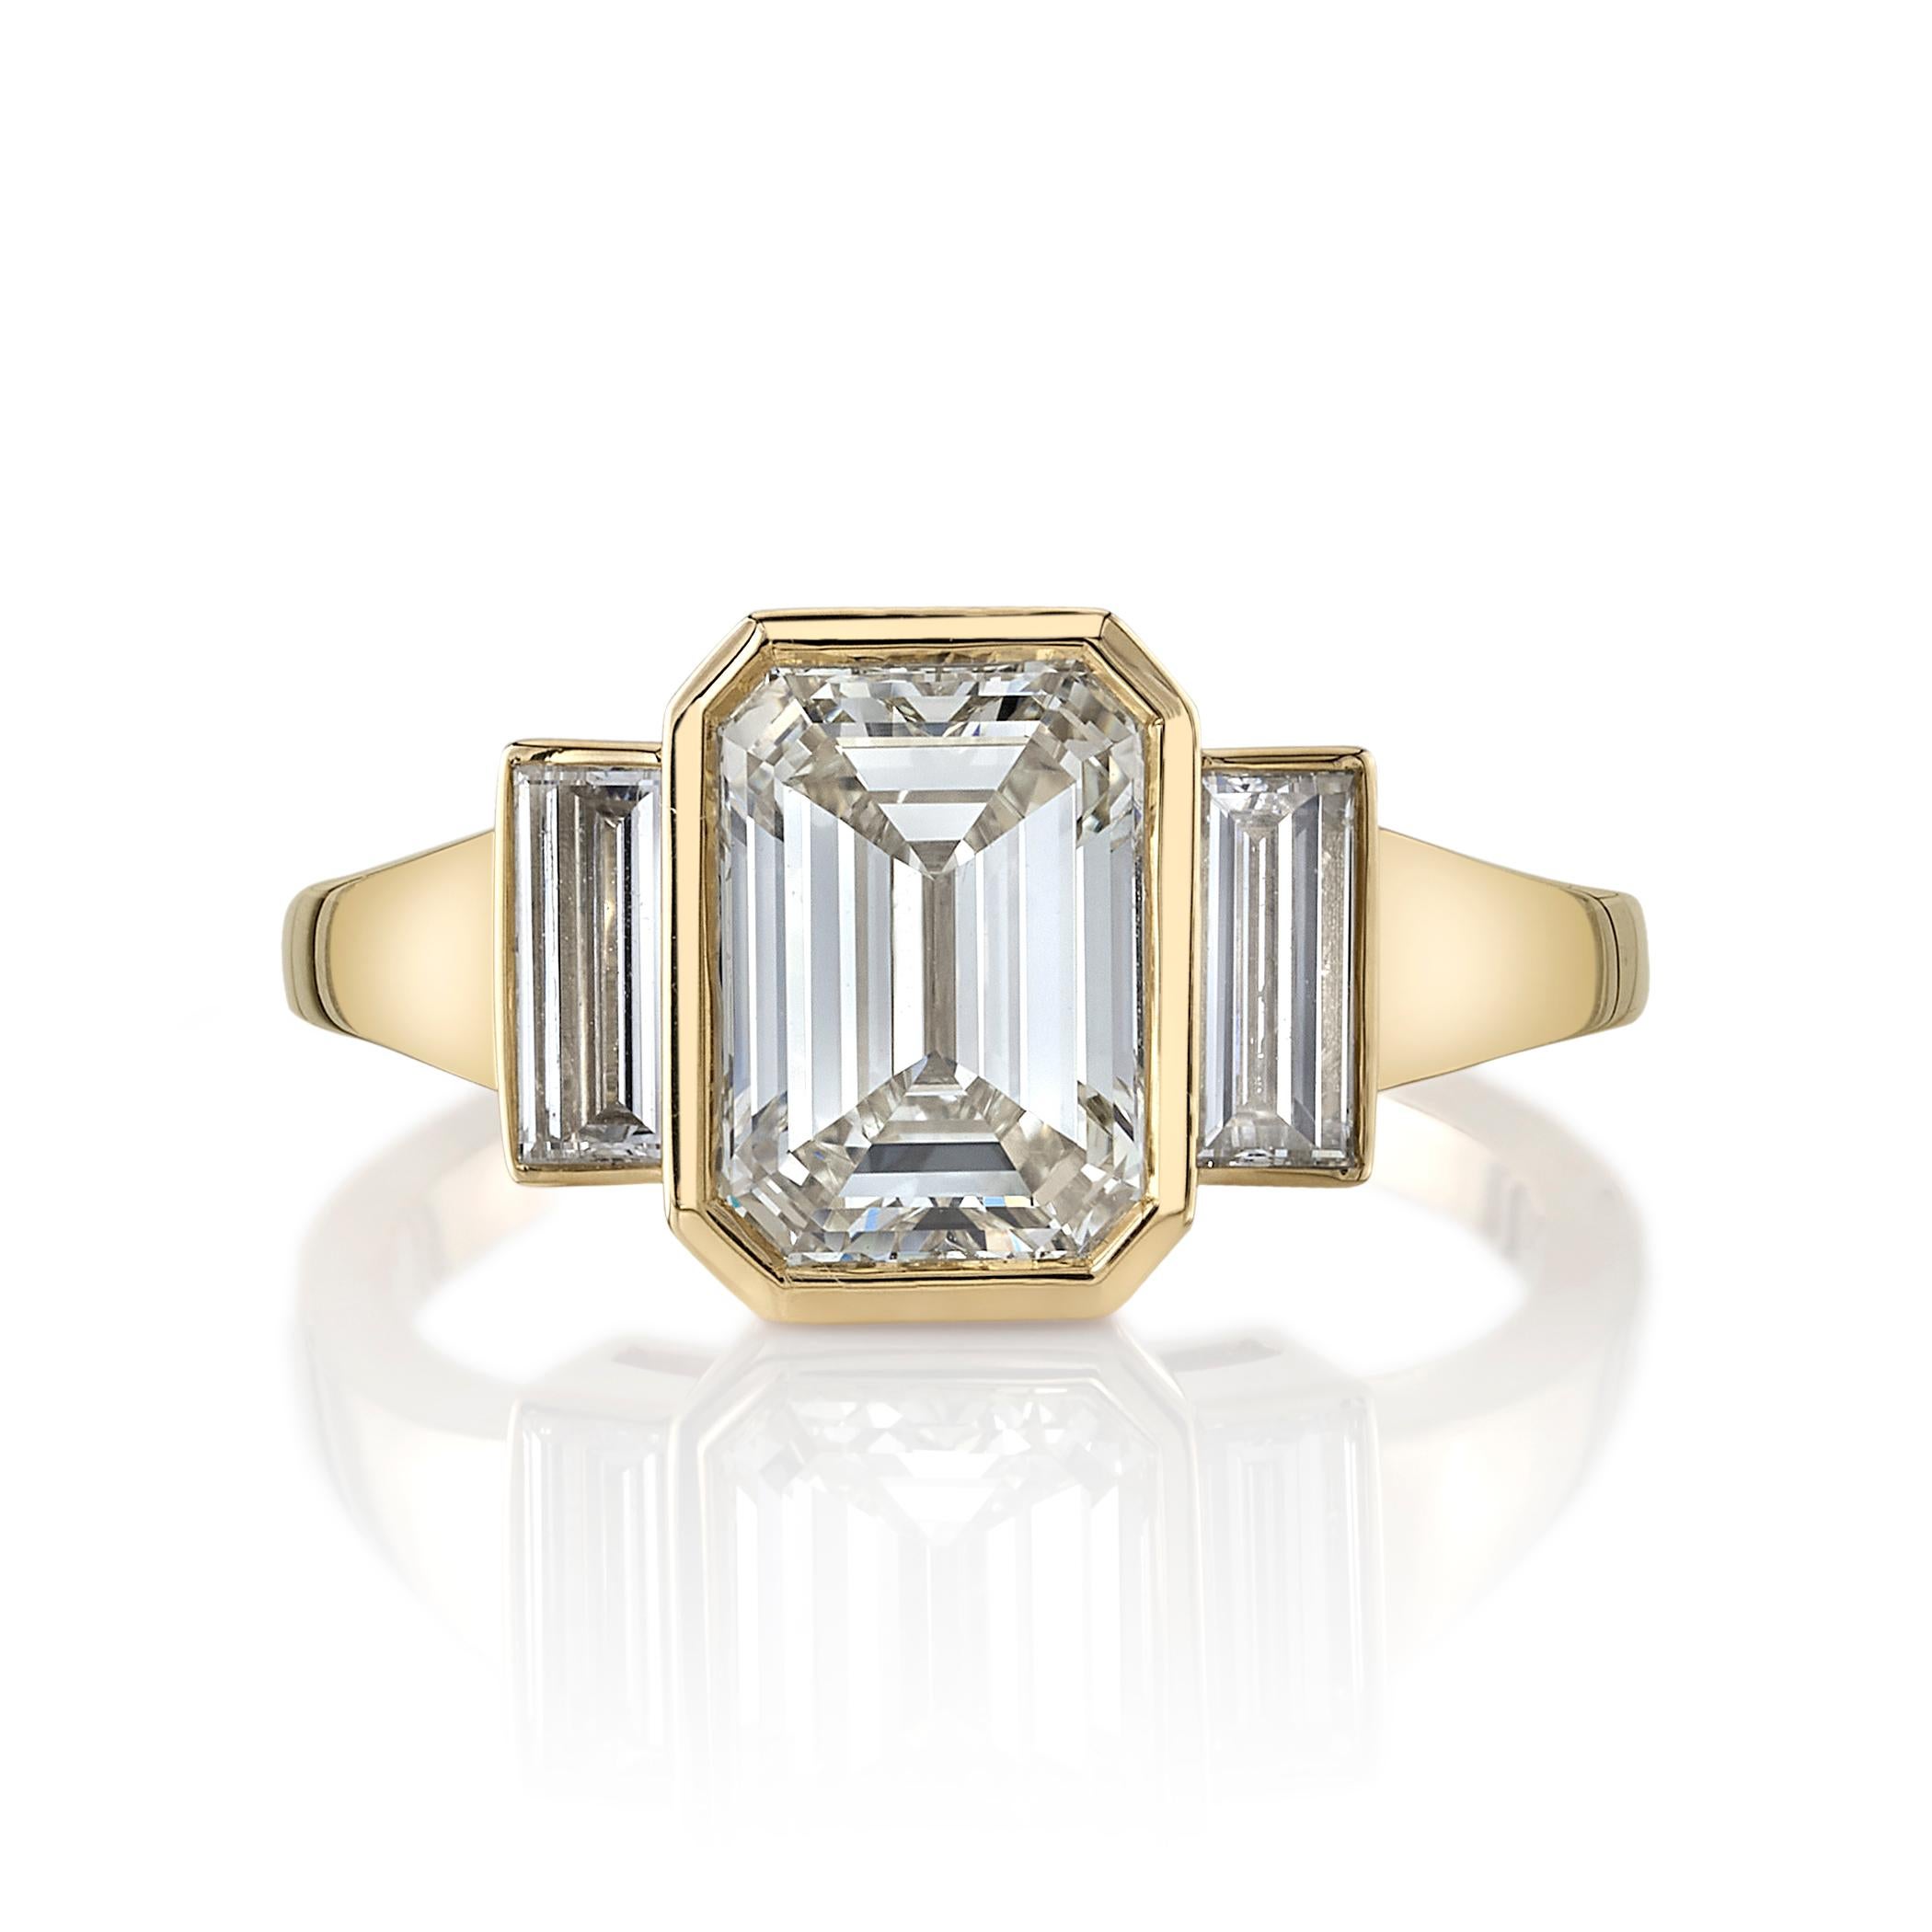 Handcrafted Amelia Emerald Cut Diamond Ring by Single Stone For Sale